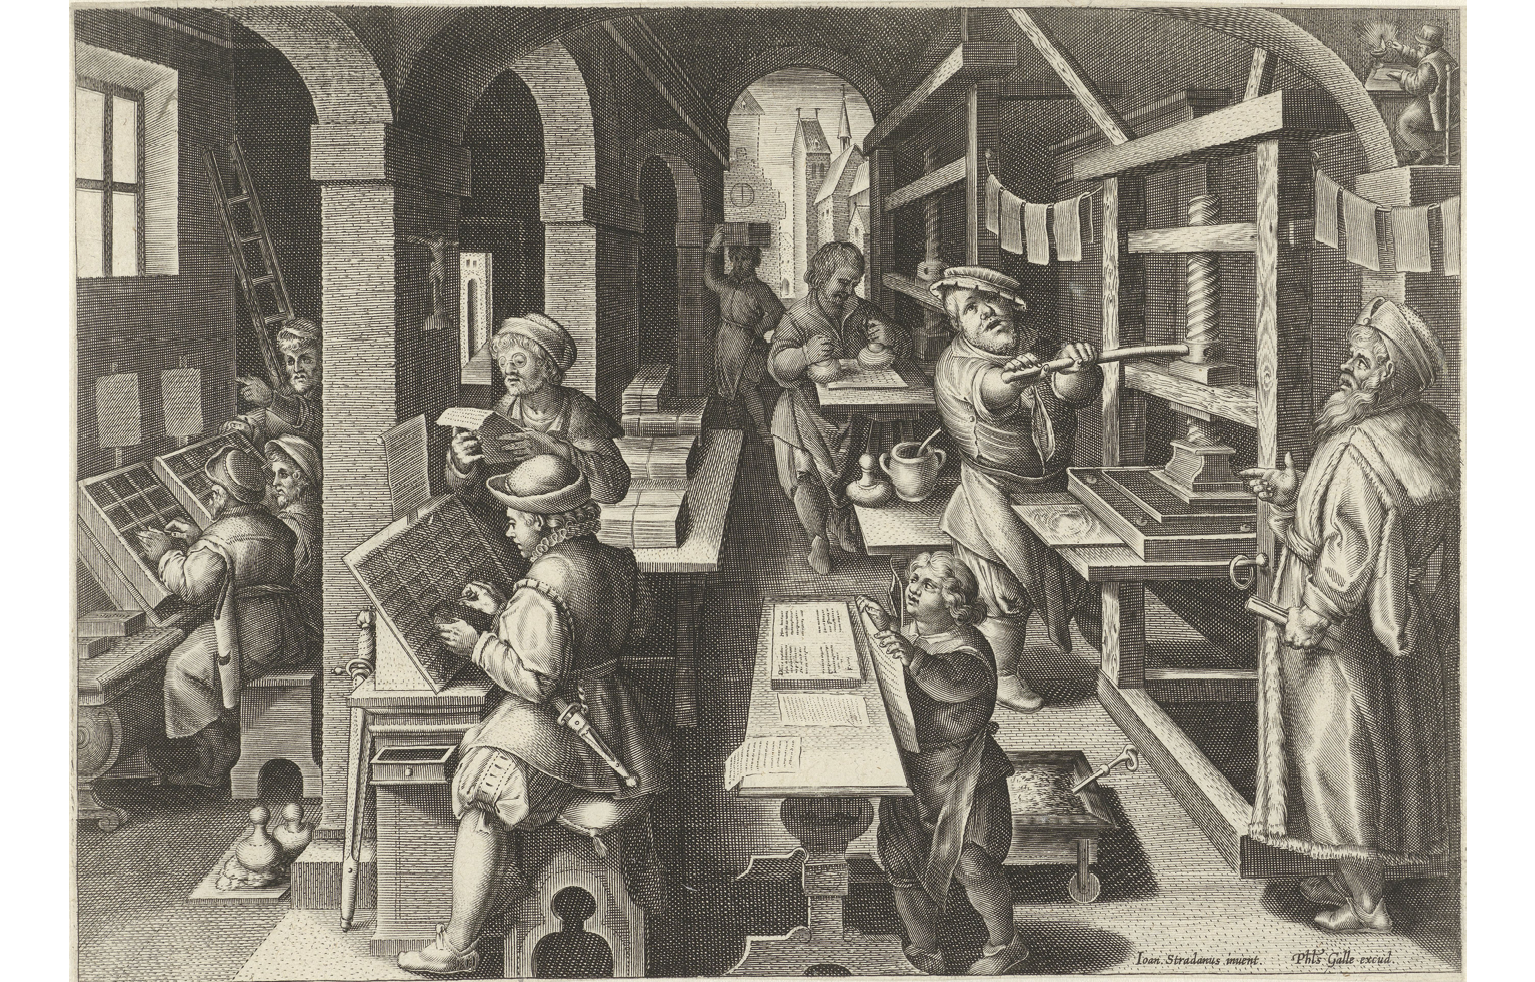 A black and white art piece: depicts a printing workshop and its process; shows men and women working at different printing stations, including typesetting, printing, and hanging printed sheets.